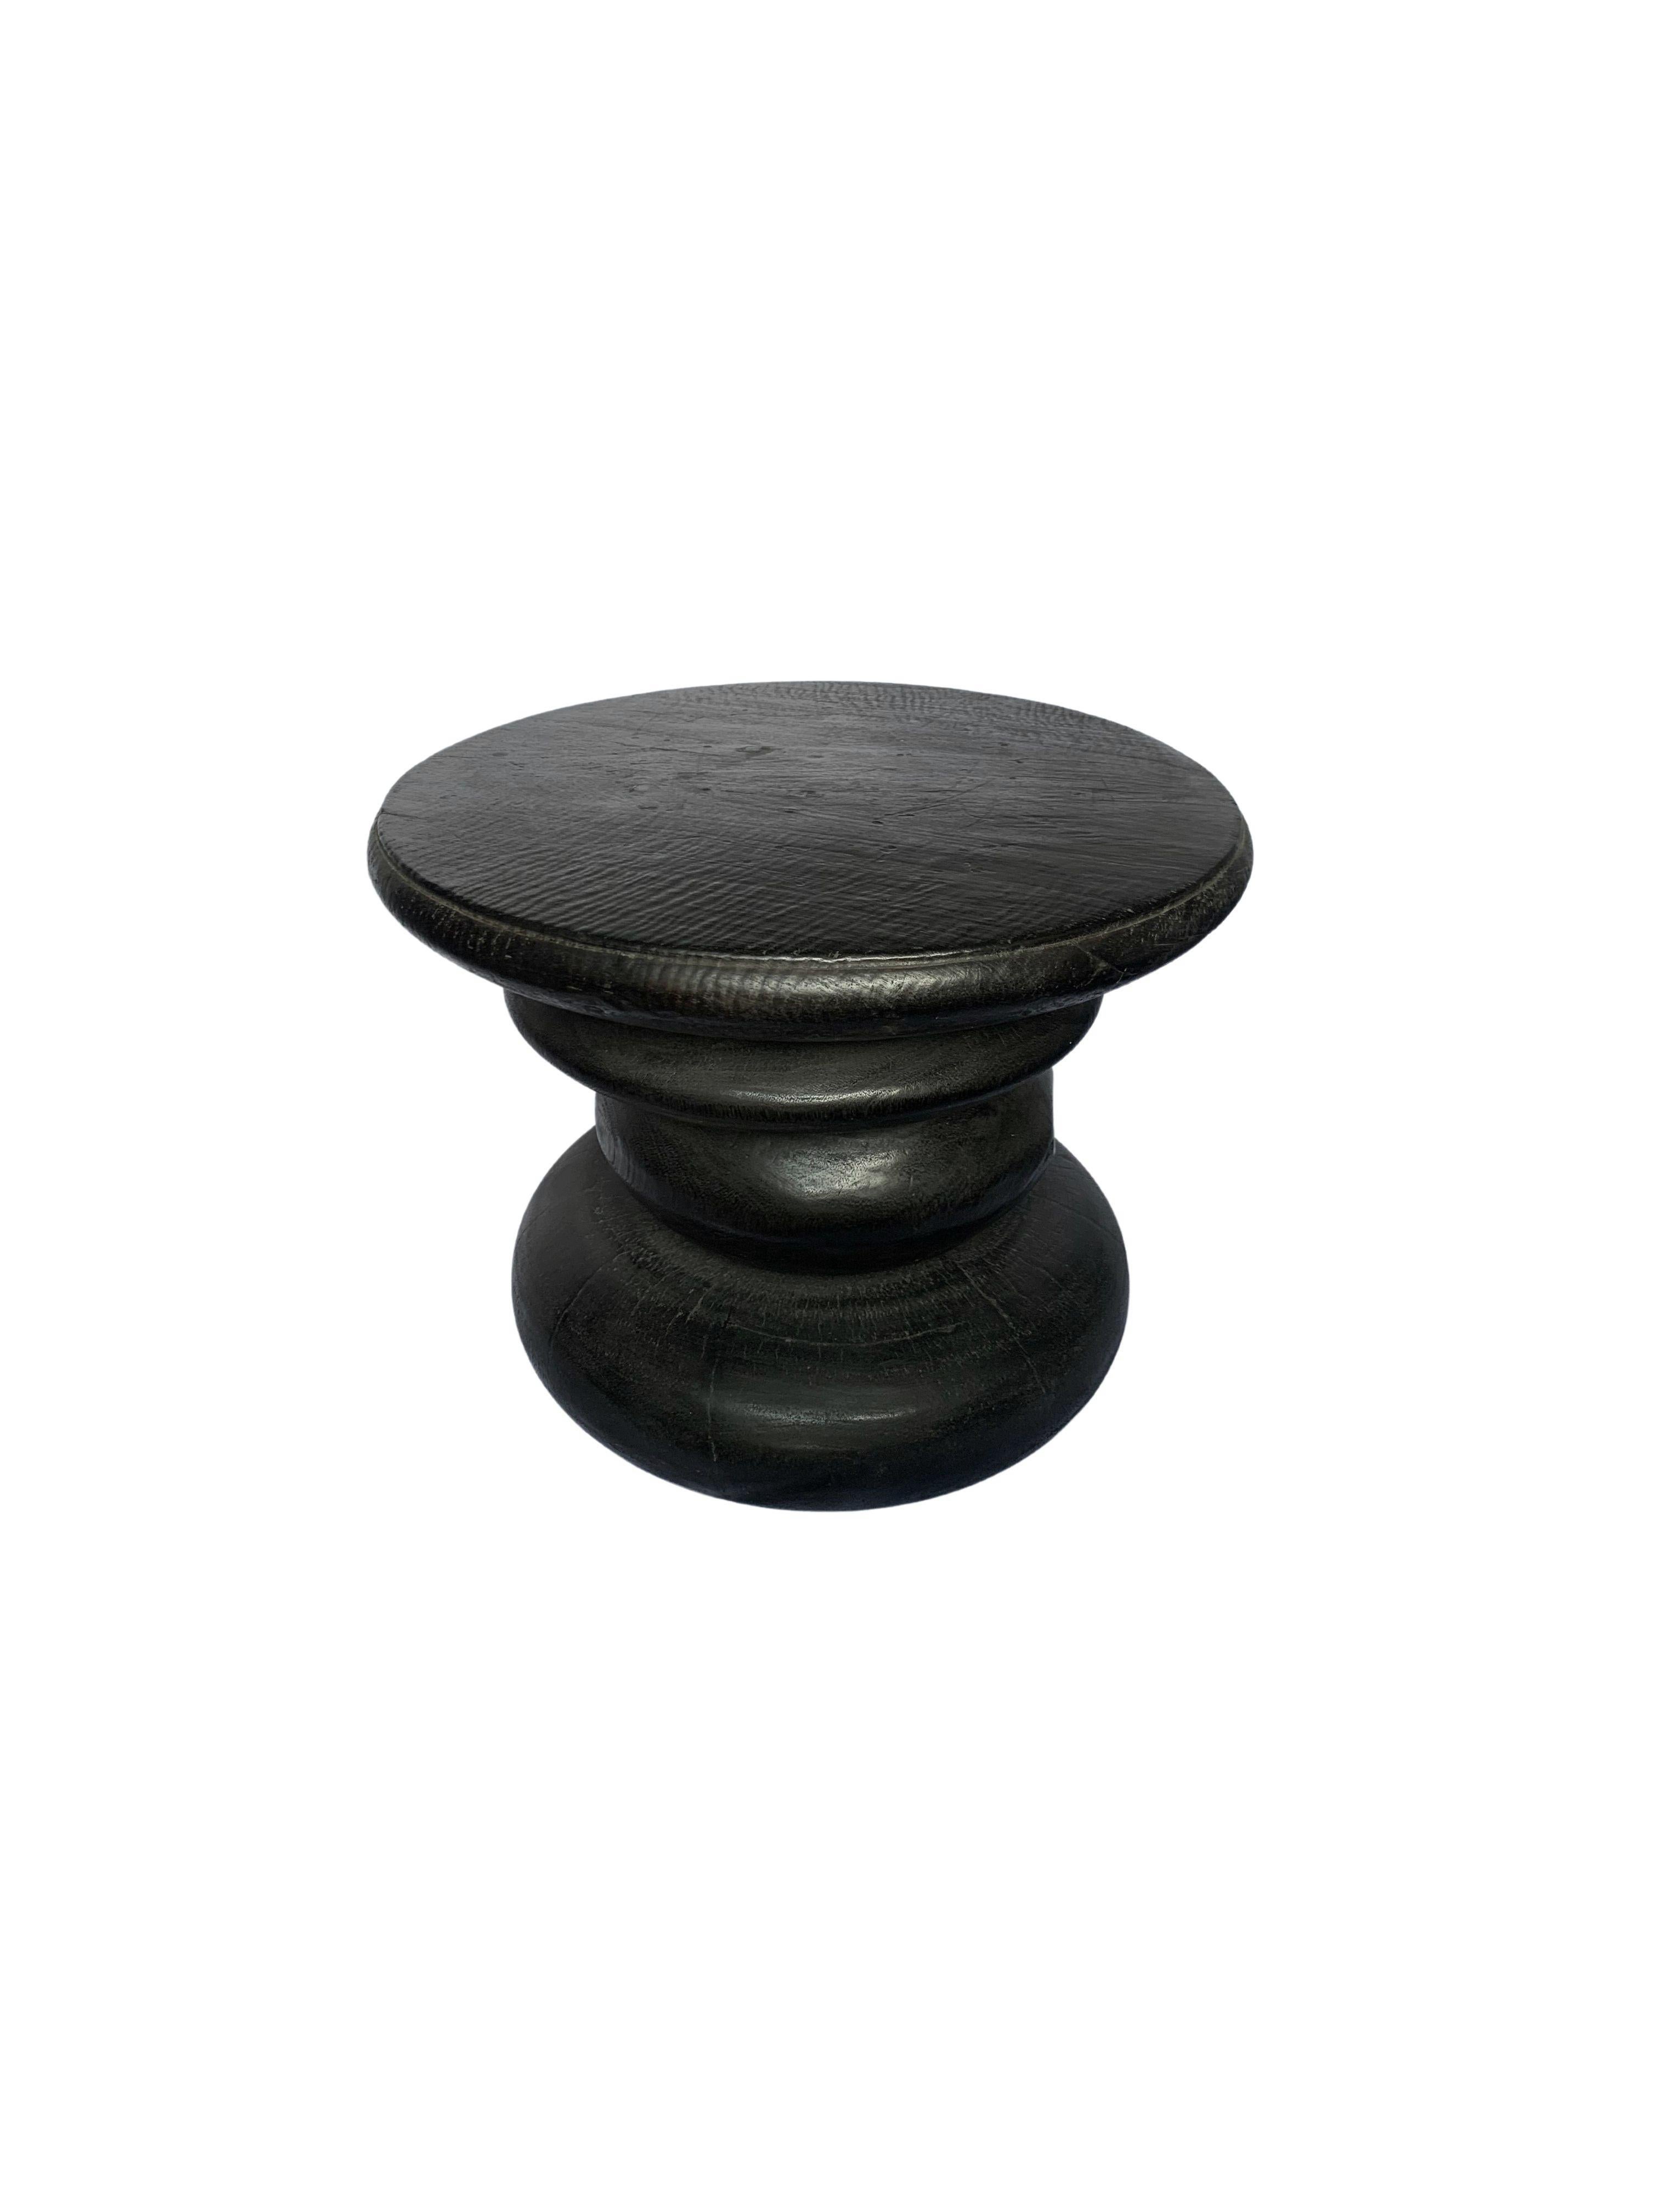 A wonderfully sculptural side table resembling a pile a river stones in a burnt finish. Its neutral pigment and subtle wood texture makes it perfect for any space. A uniquely sculptural and versatile piece certain to invoke conversation. This table